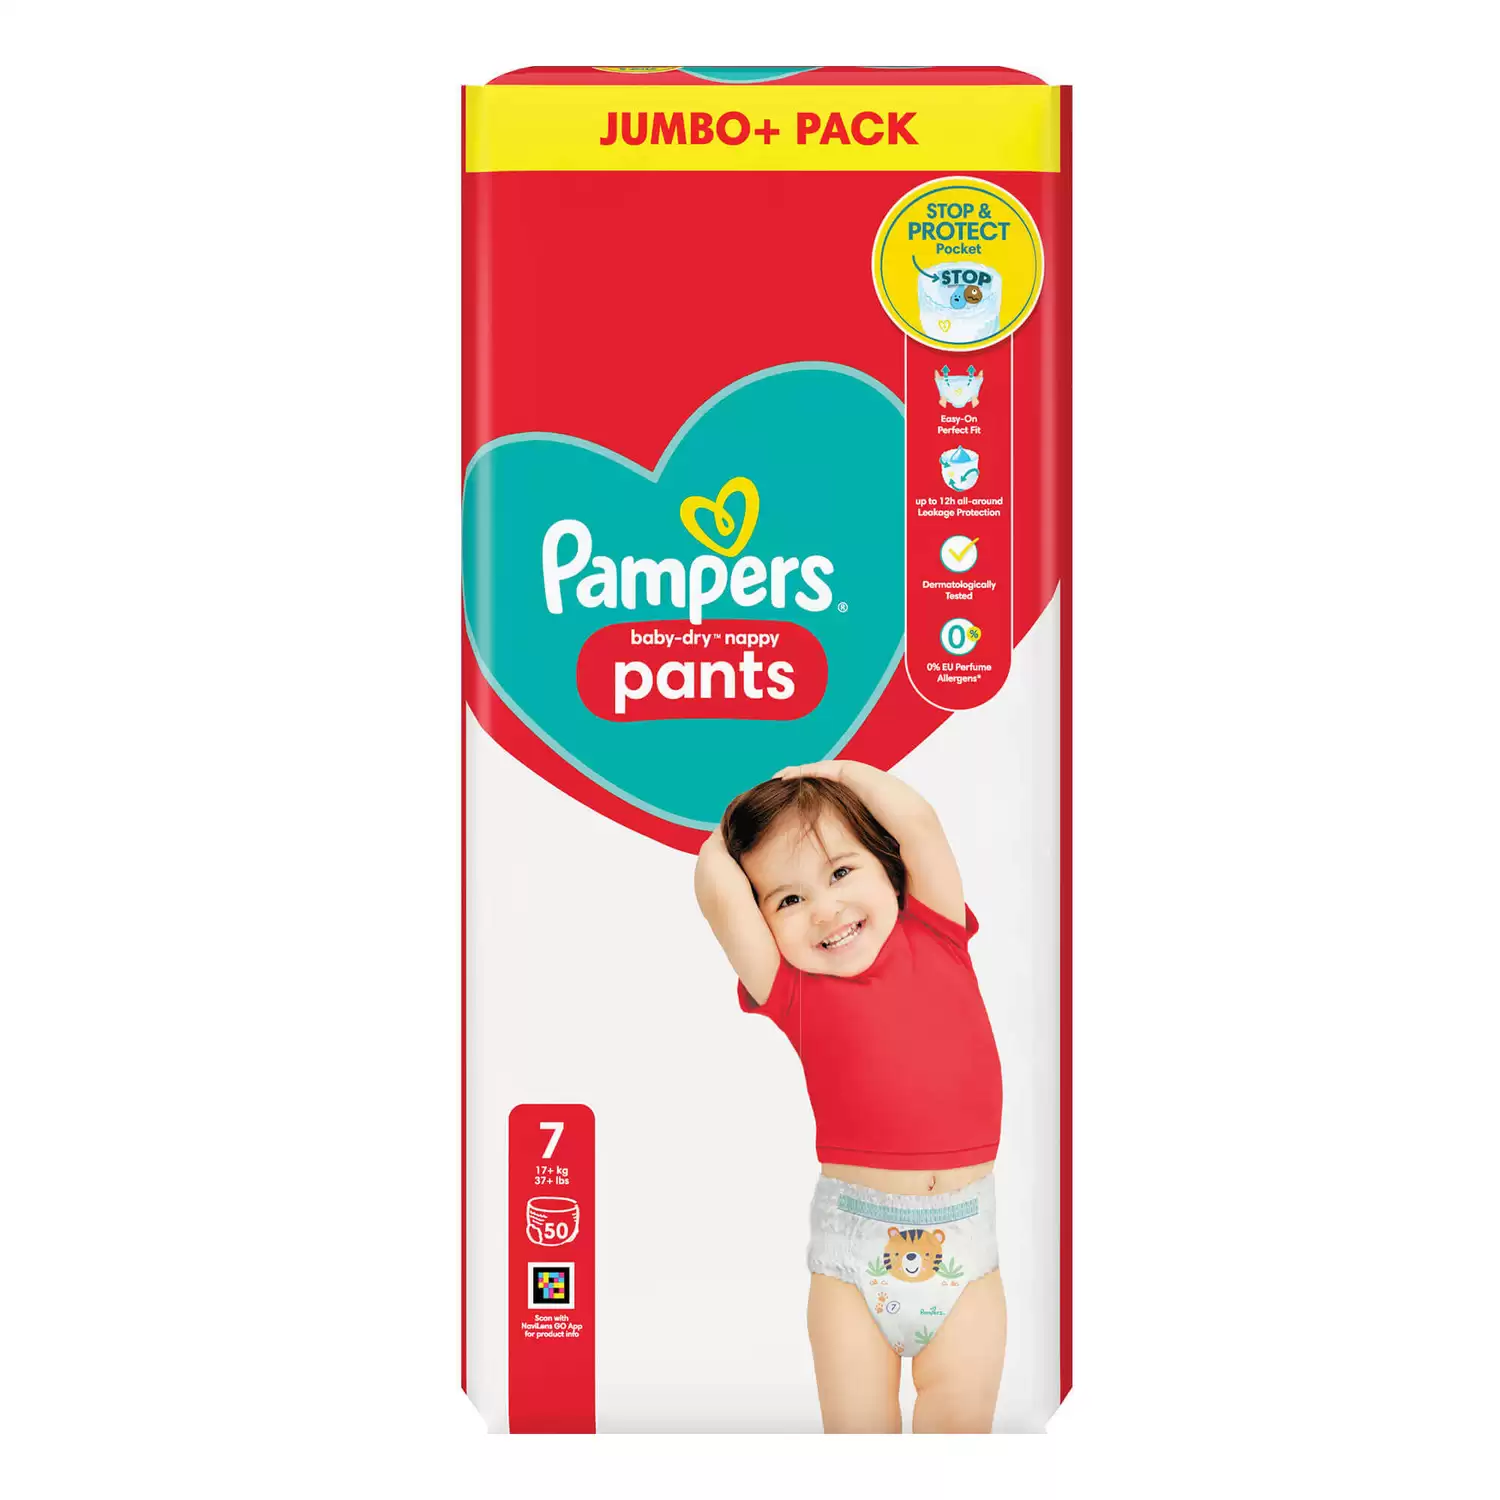 Pampers Baby Dry Nappy Pants Size 7 50 Pack - Gompels - Care & Nursery  Supply Specialists